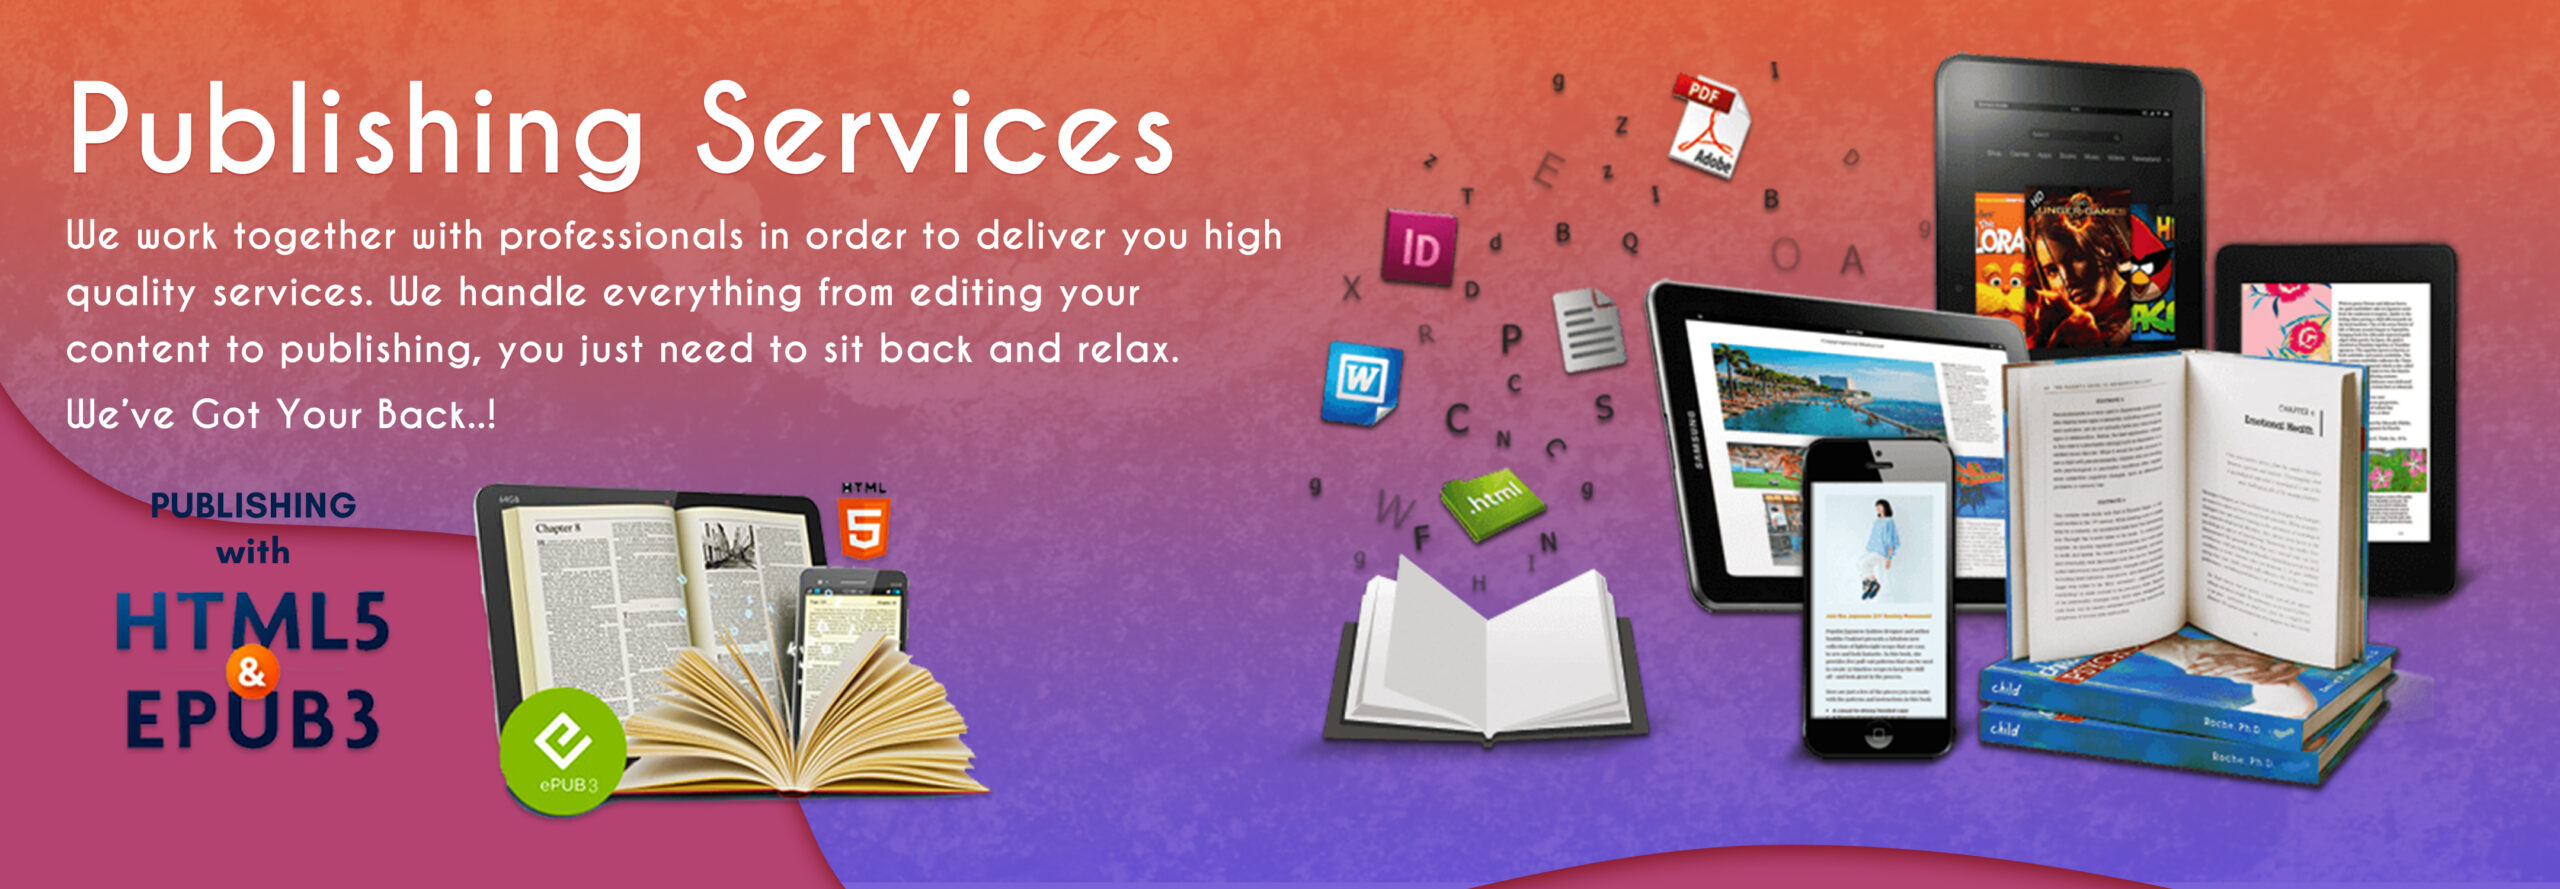 publishing services hd